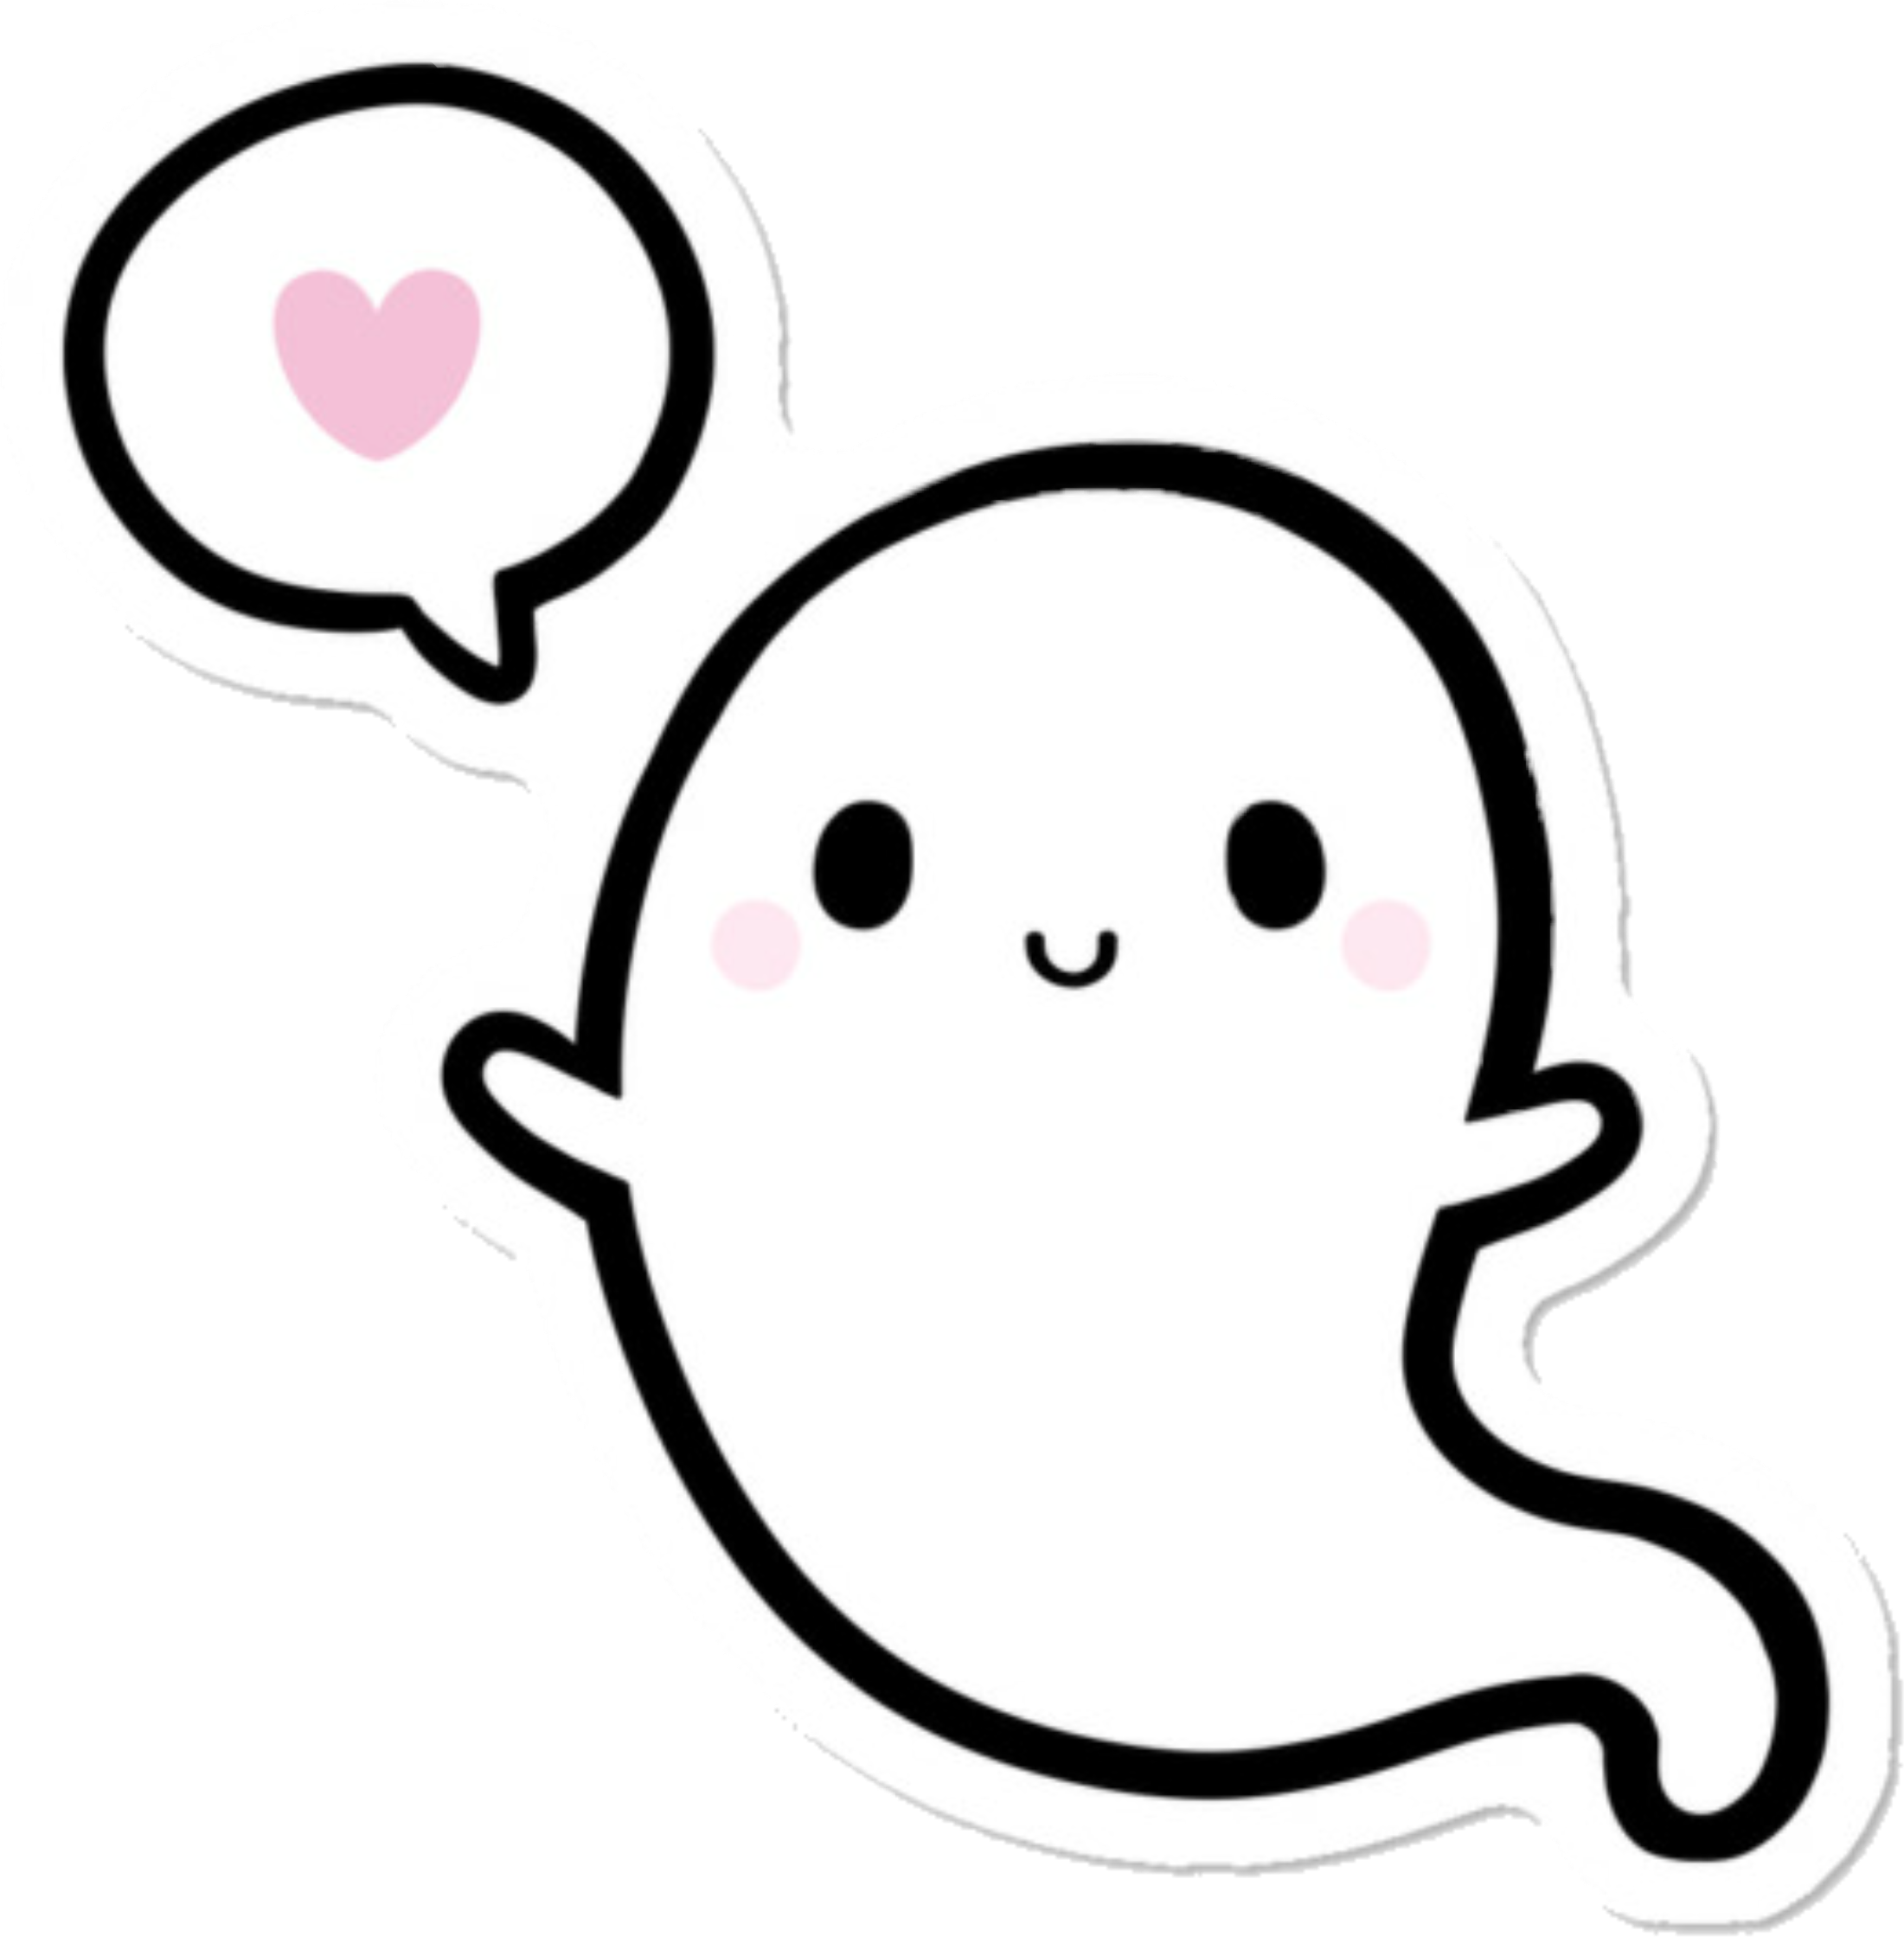 Cute Ghost With Heart Bubble Sticker PNG